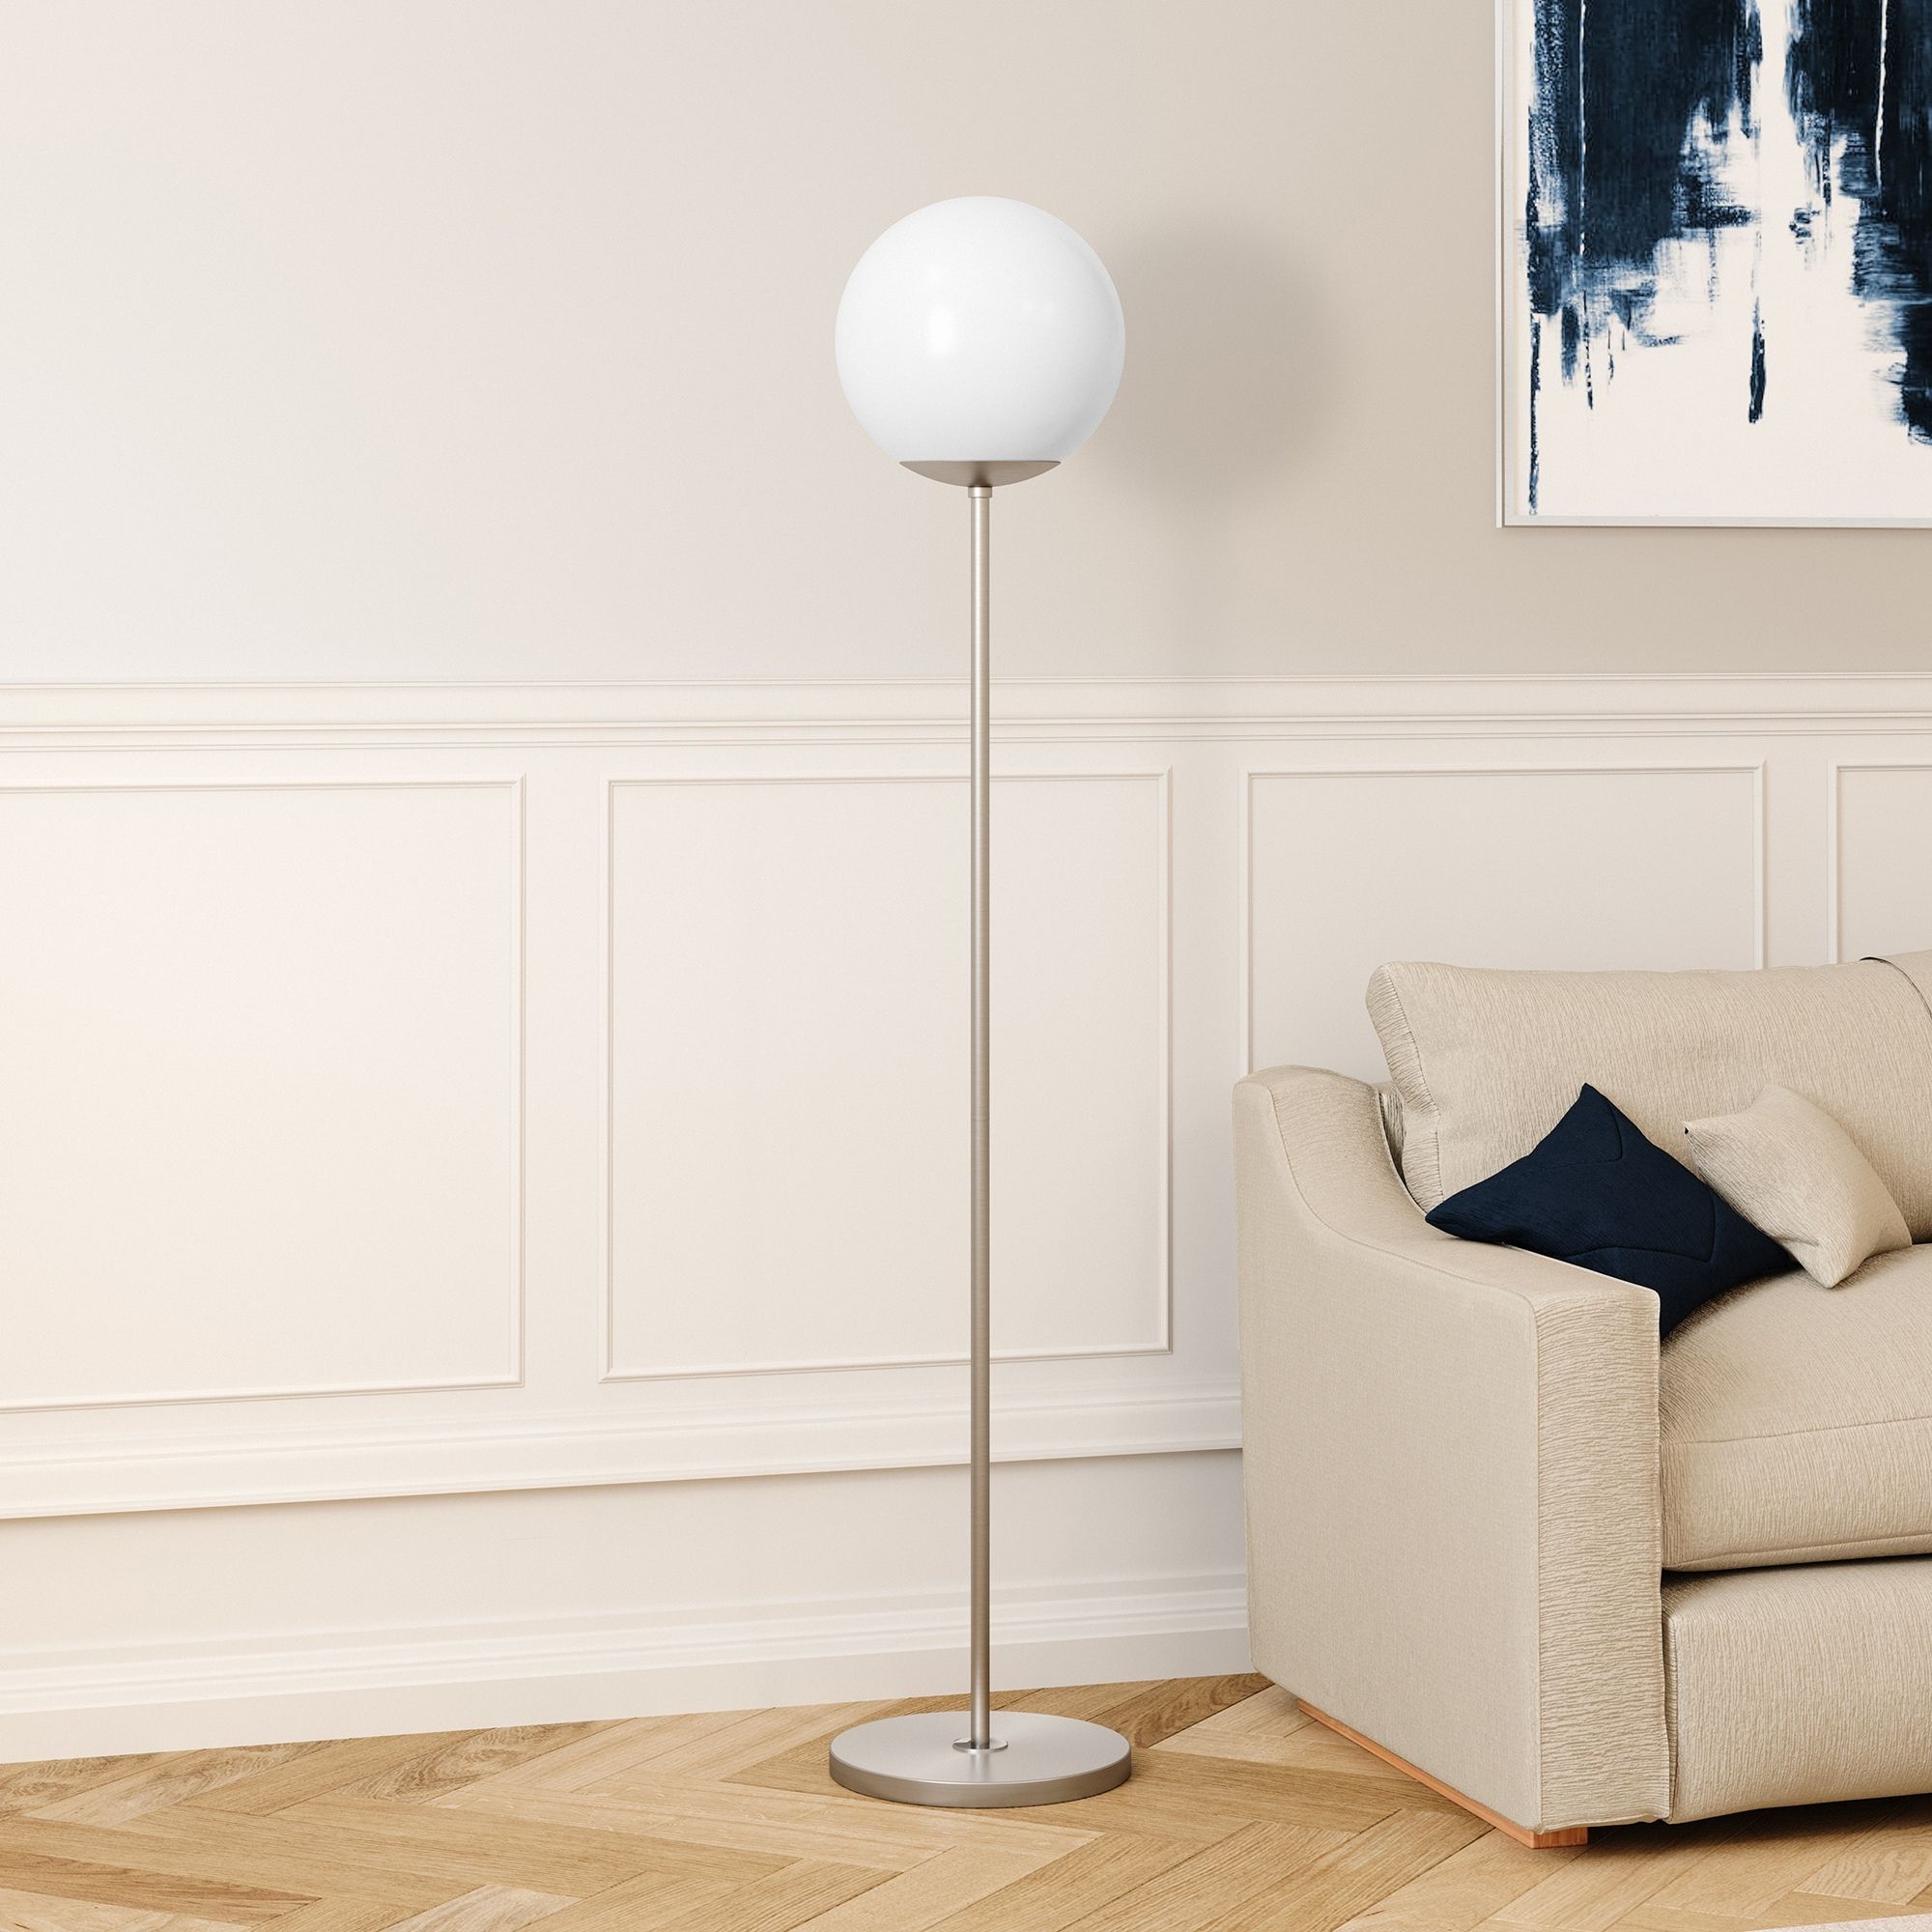 Most Recent Theia Globe Shade Floor Lamp – On Sale – Overstock – 23572461 With Regard To Globe Floor Lamps (View 2 of 15)